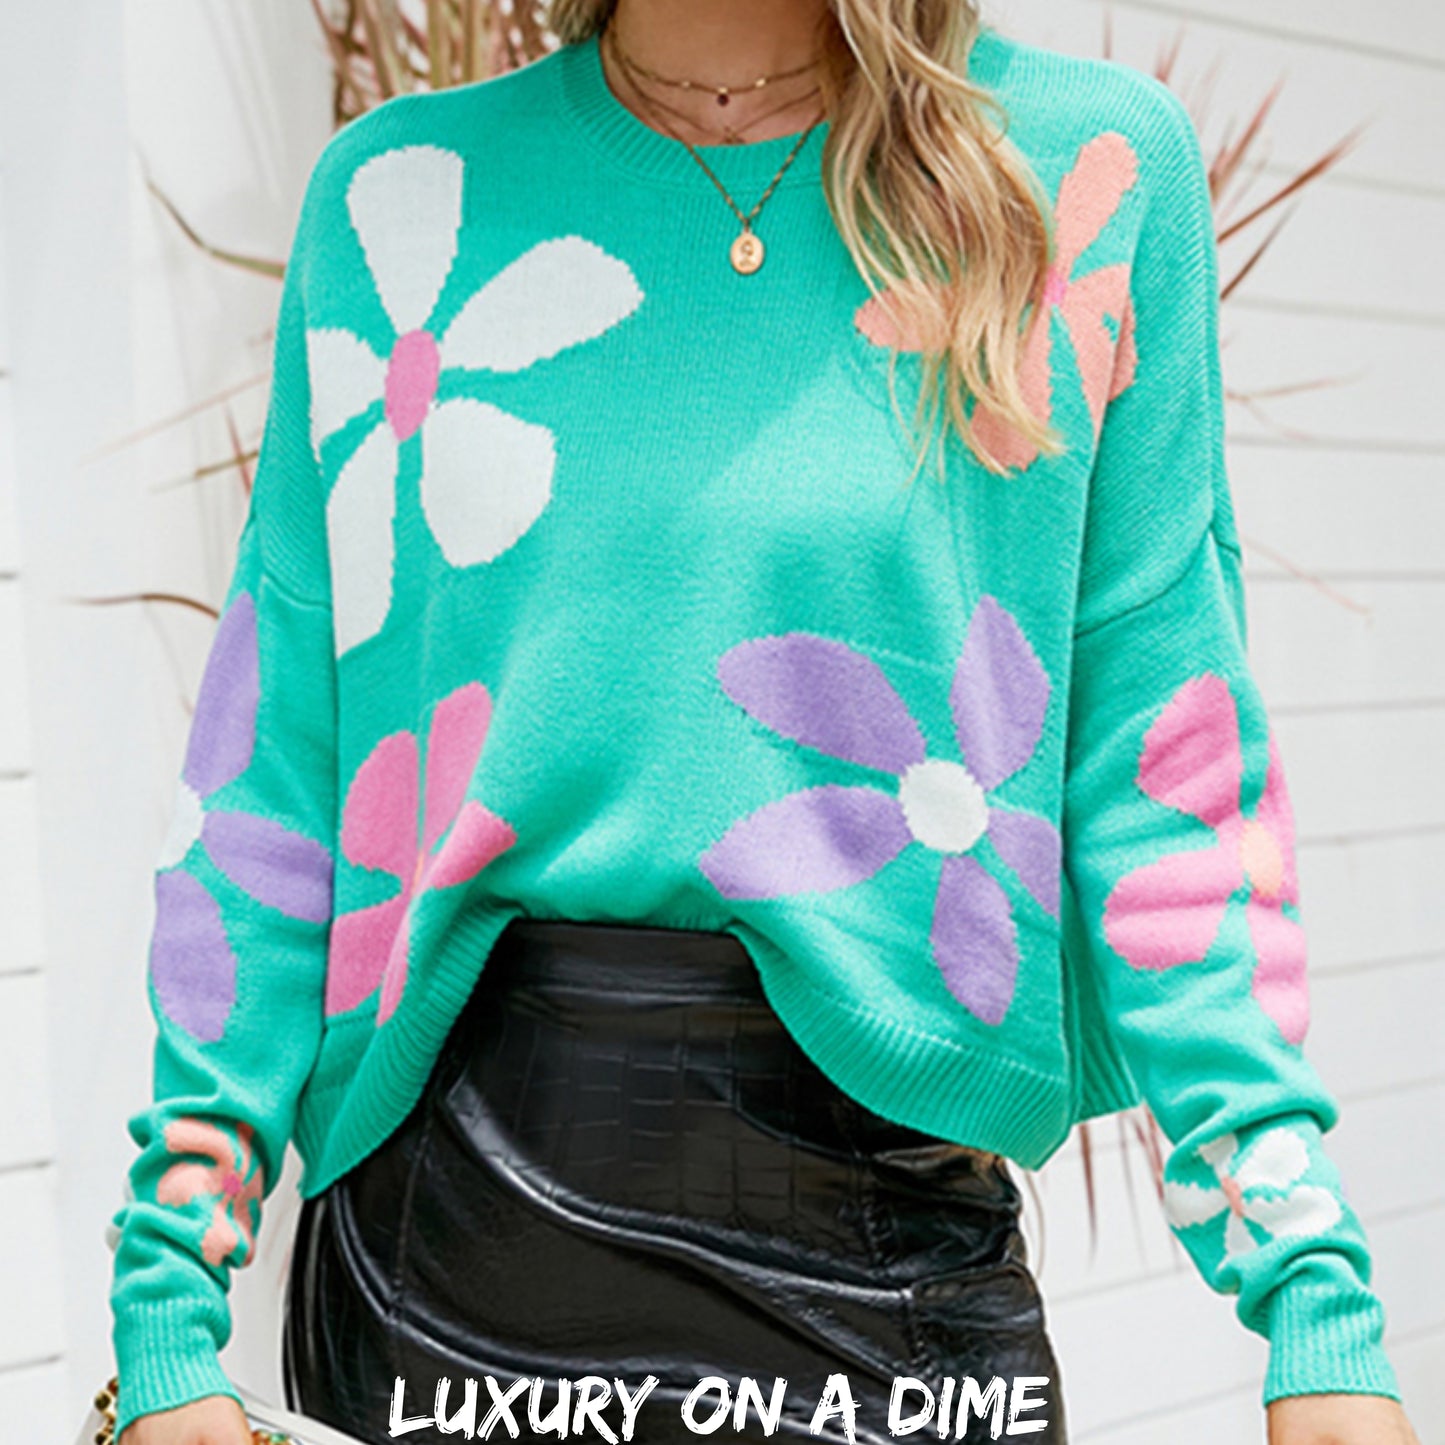 Colorful Knit Daisy Retro Flower Crop Top Long Sleeve Round Neck Sweater Shirt